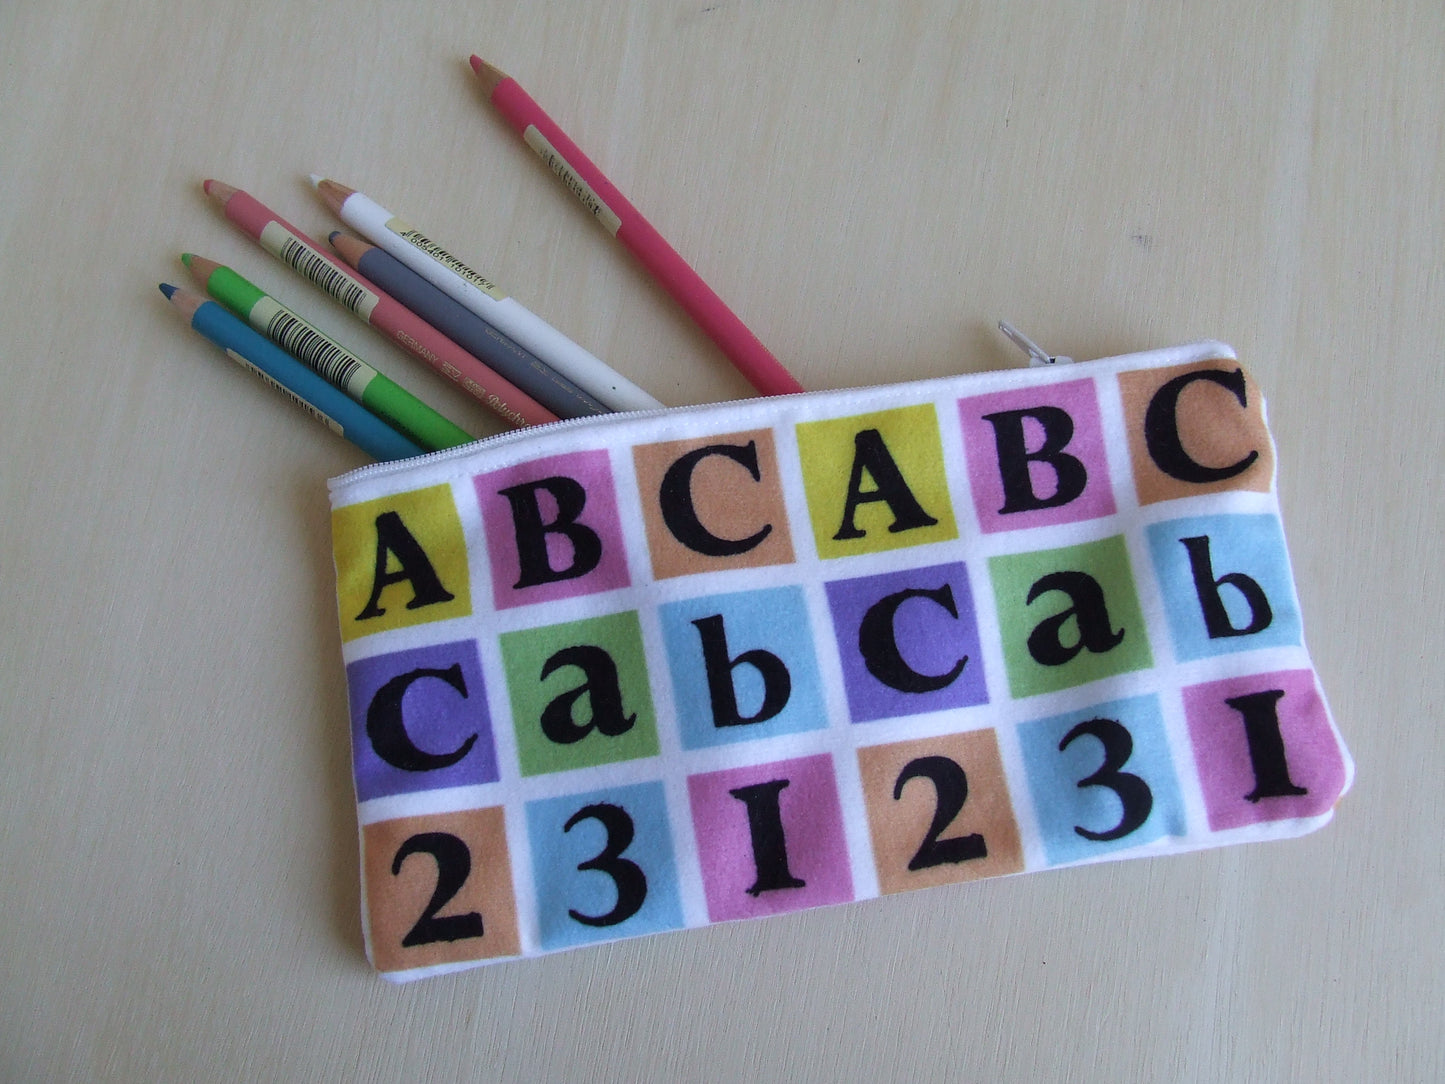 ABC and 123 Coloured Block Fabric as Pencil Case